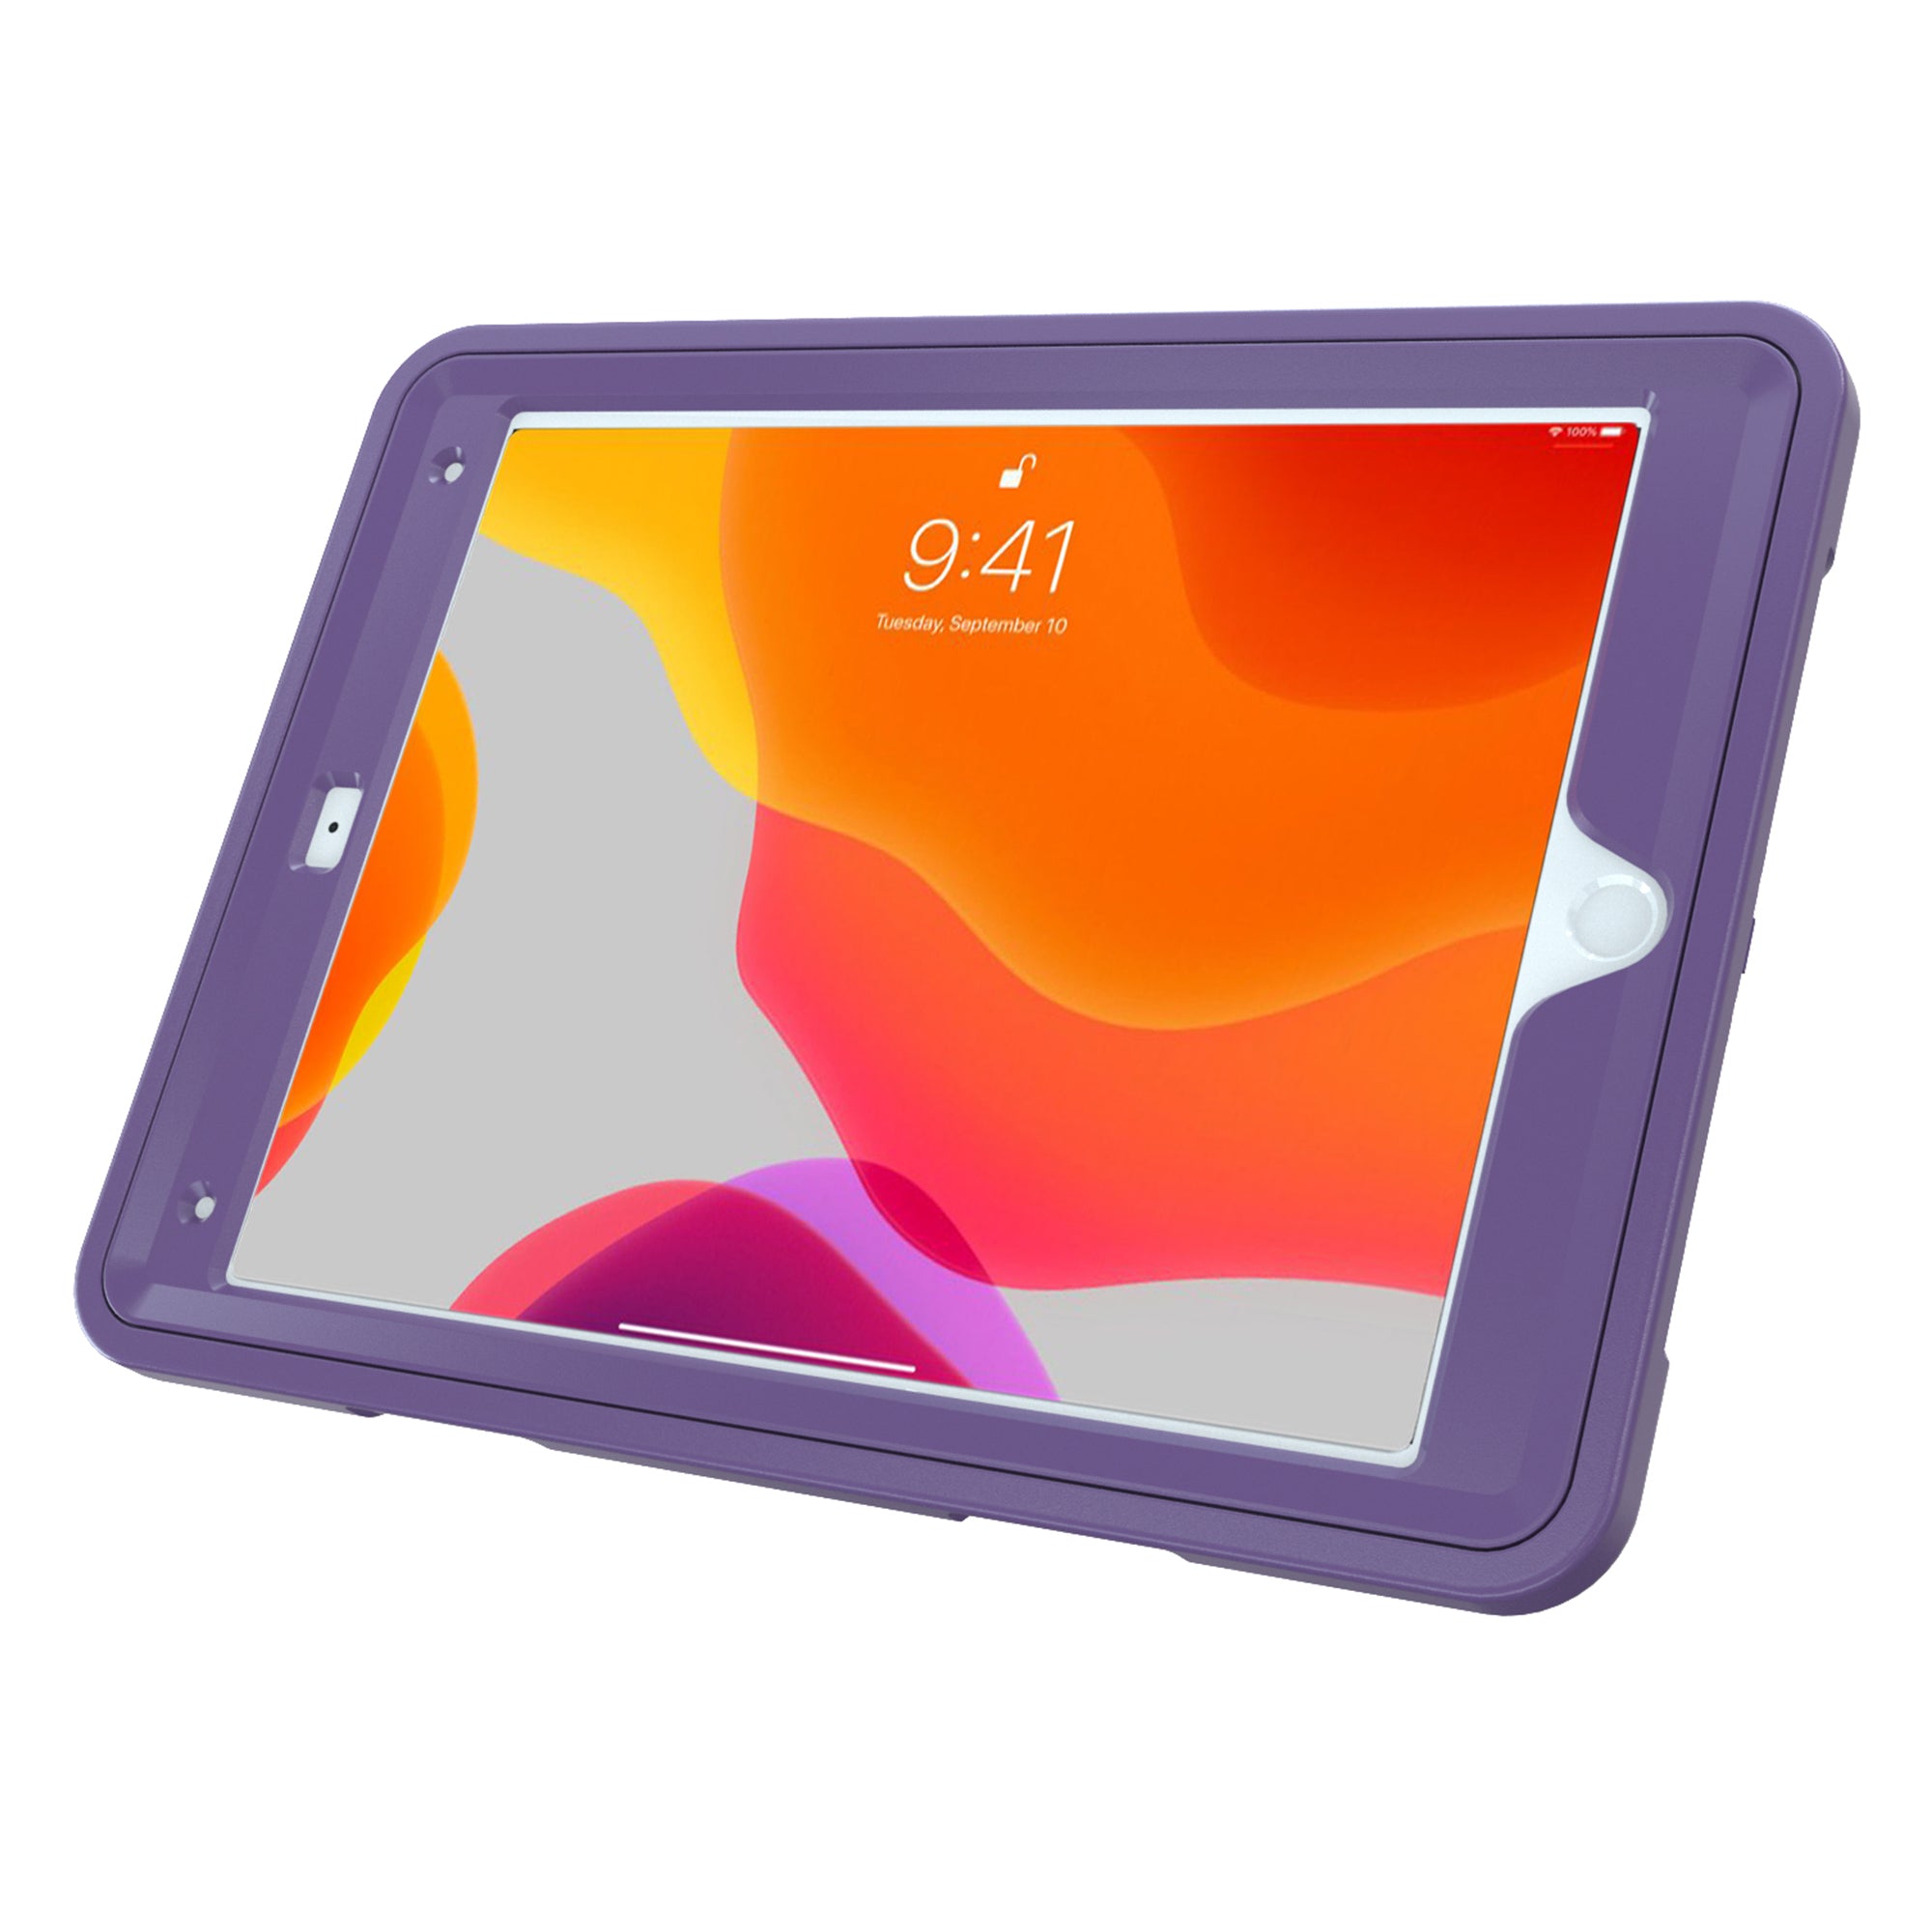 Protective Case with Built-in 360 Degree Rotatable Grip Kickstand for iPad 7th/ 8th/ 9th Gen. 10.2”, iPad Air 3 & iPad Pro 10.5”